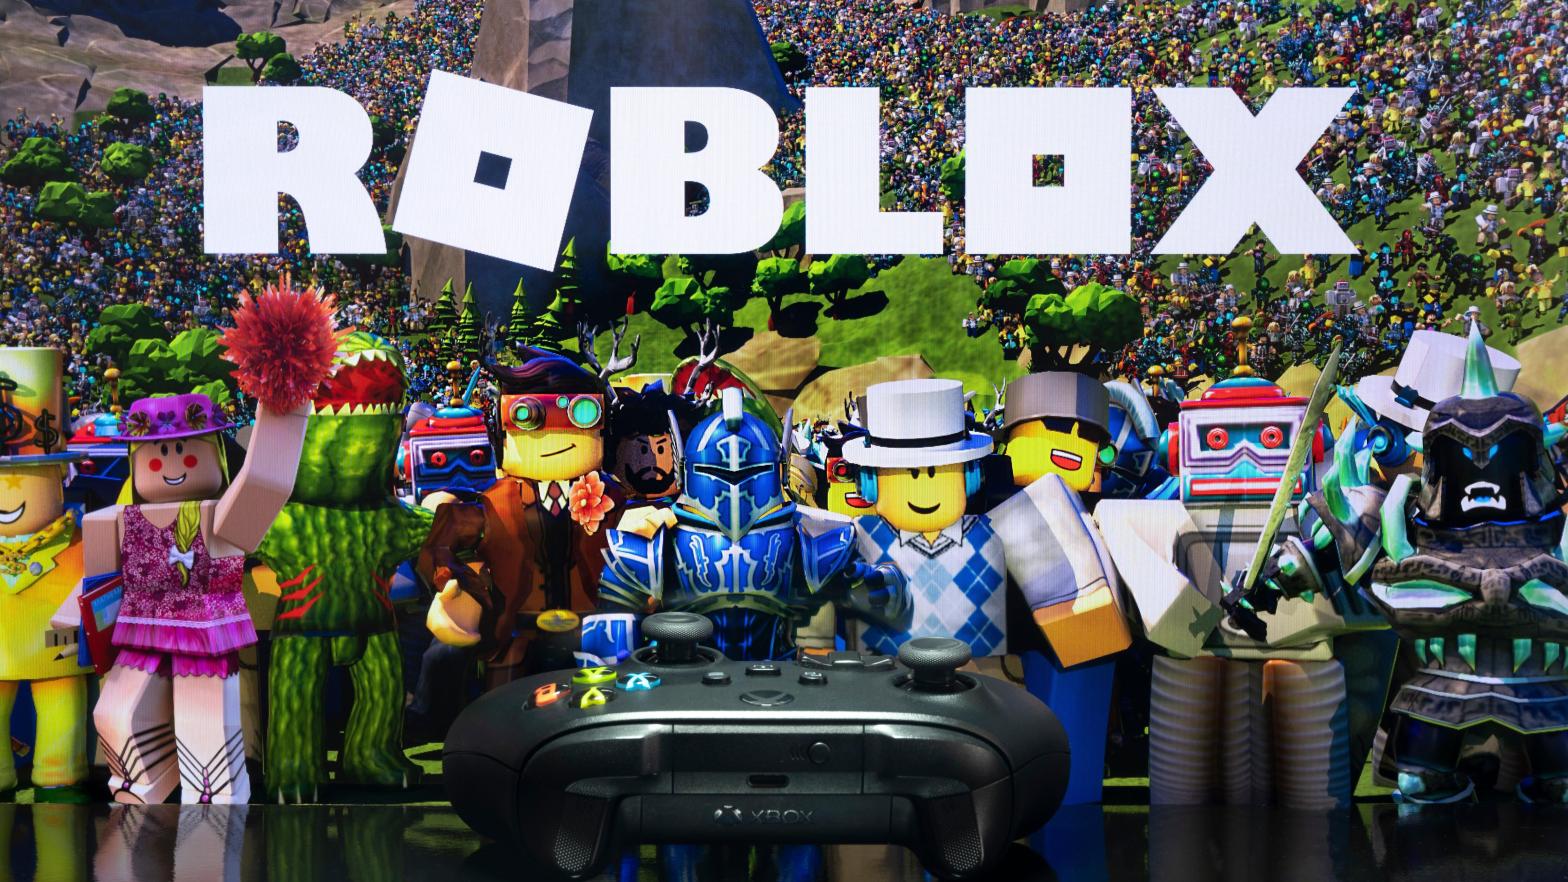 Roblox is an online gaming platform with a user base that features a high concentration of children. (Image: Migual Lagoa, Shutterstock)